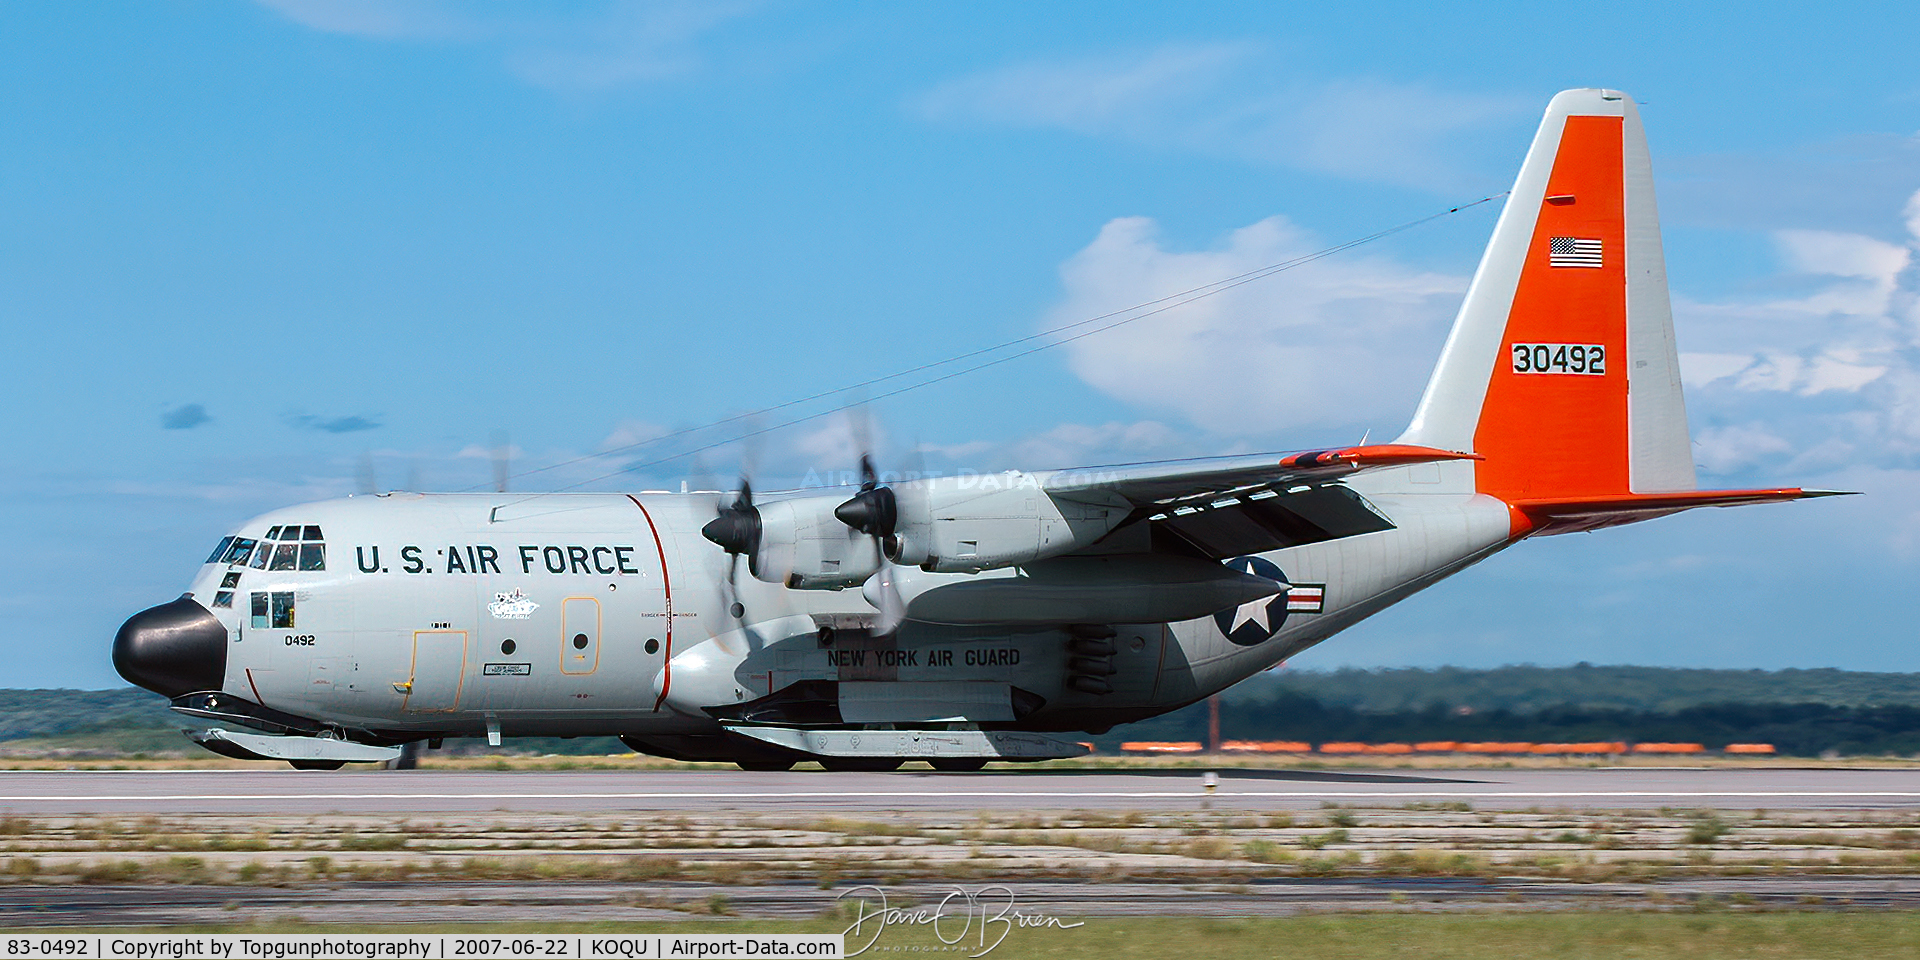 83-0492, 1983 Lockheed LC-130H Hercules C/N 382-5013, SKIER42 lands at Quonset for static display